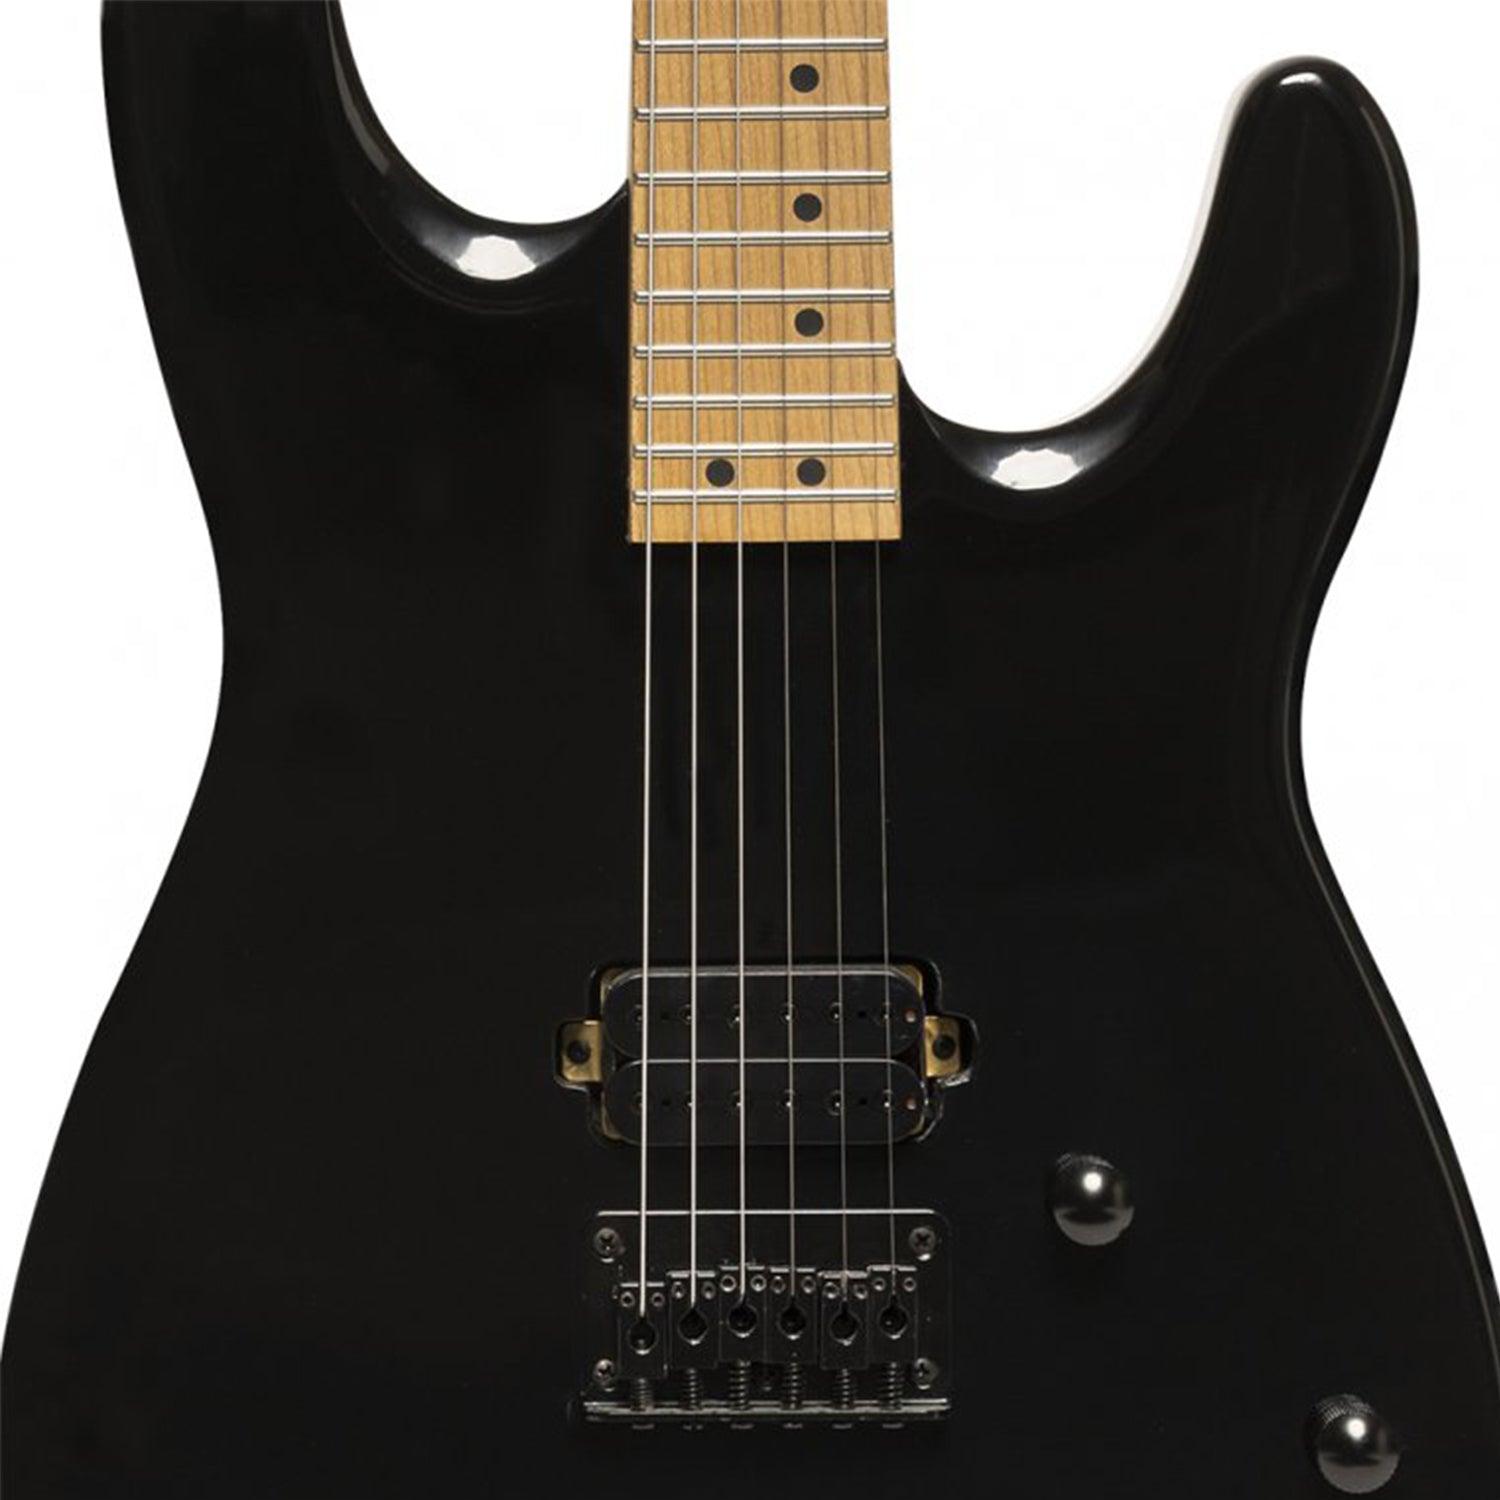 Stagg SEM-ONE H BK Metal series Electric Guitar with solid mahogany body - DY Pro Audio